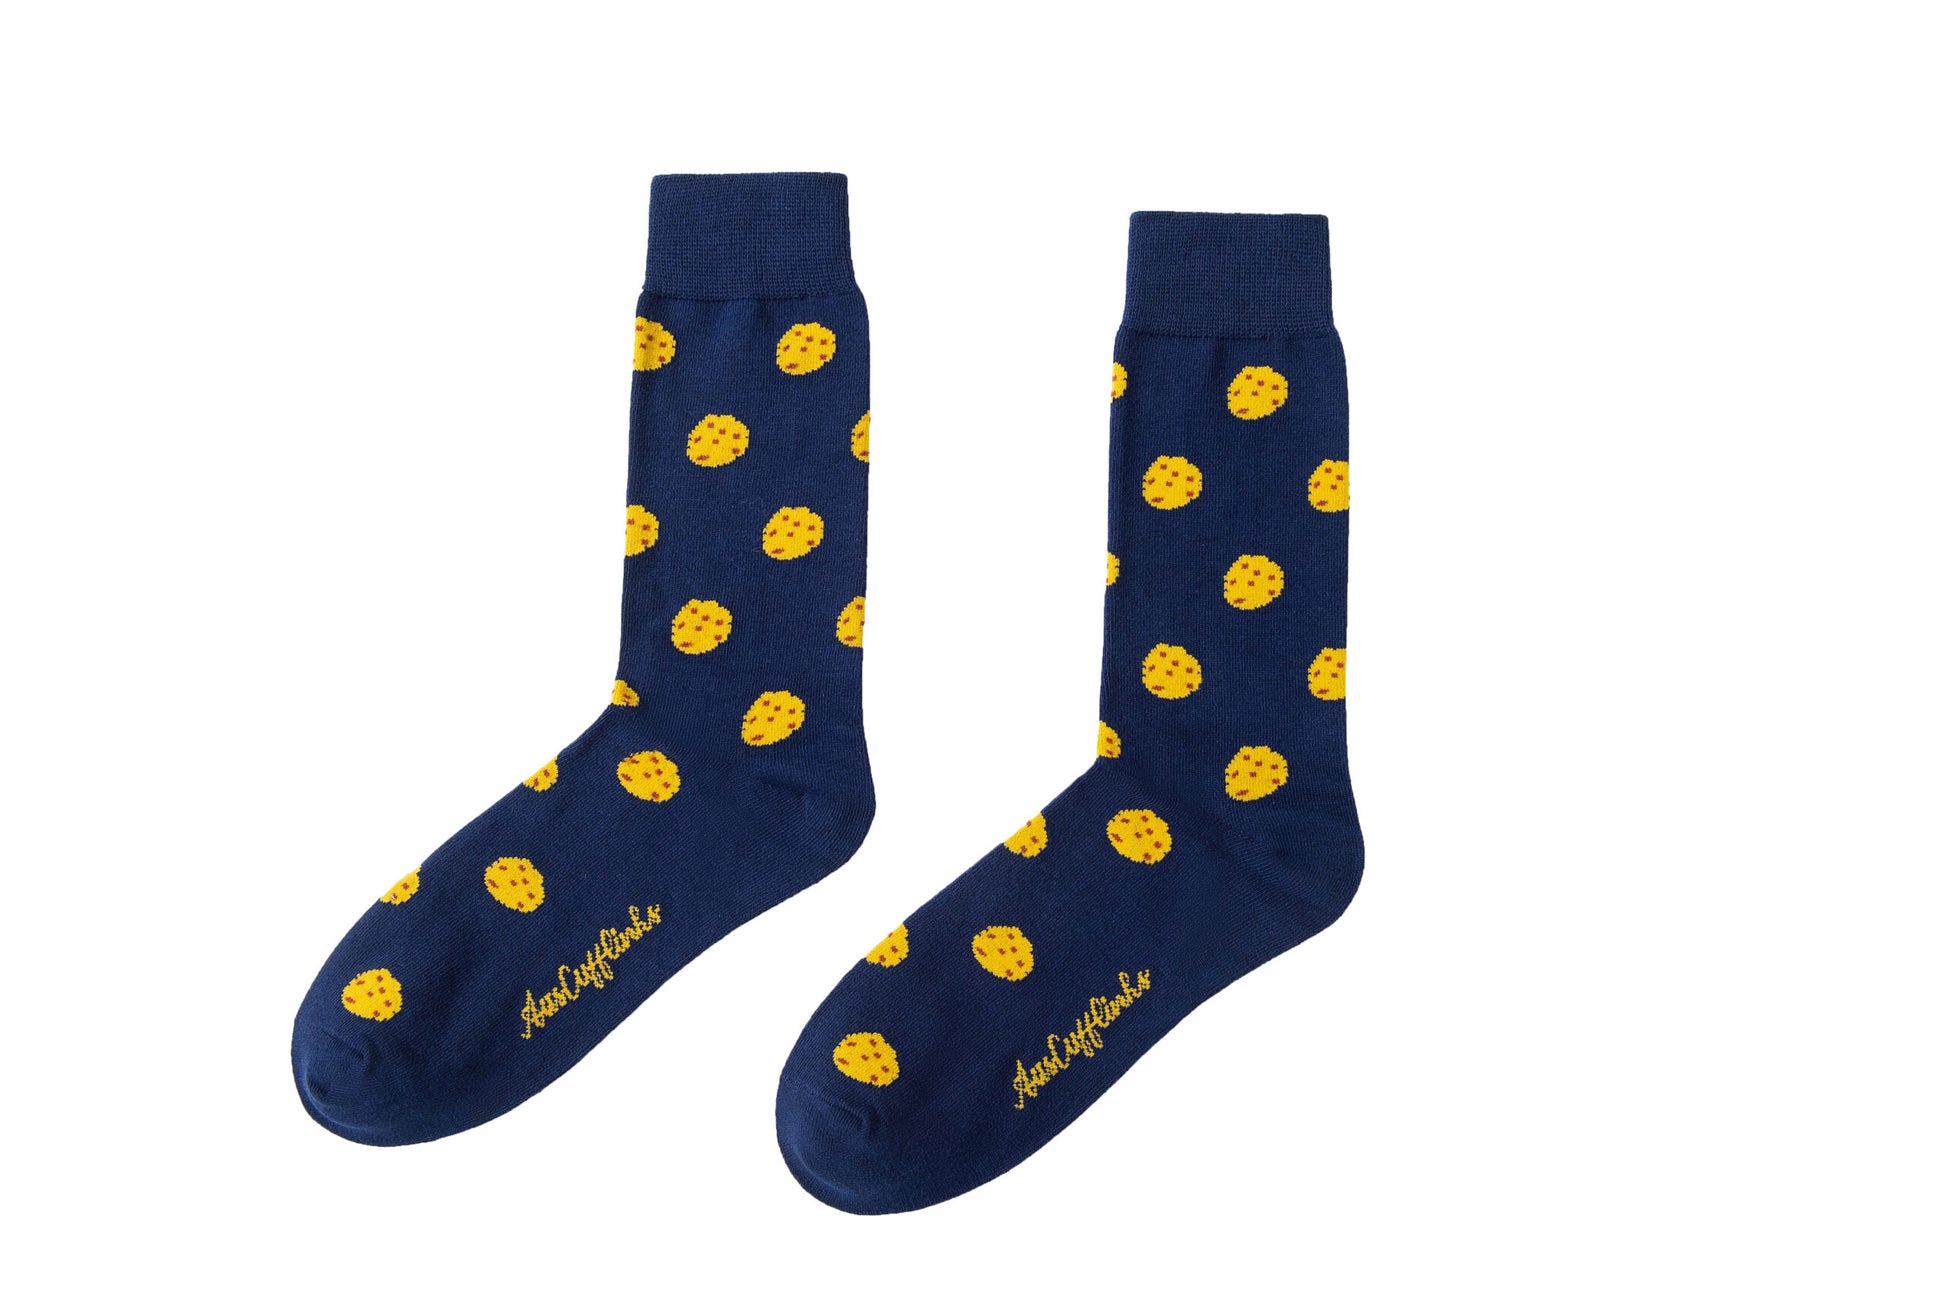 A pair of Cookie Socks with yellow dots on them.